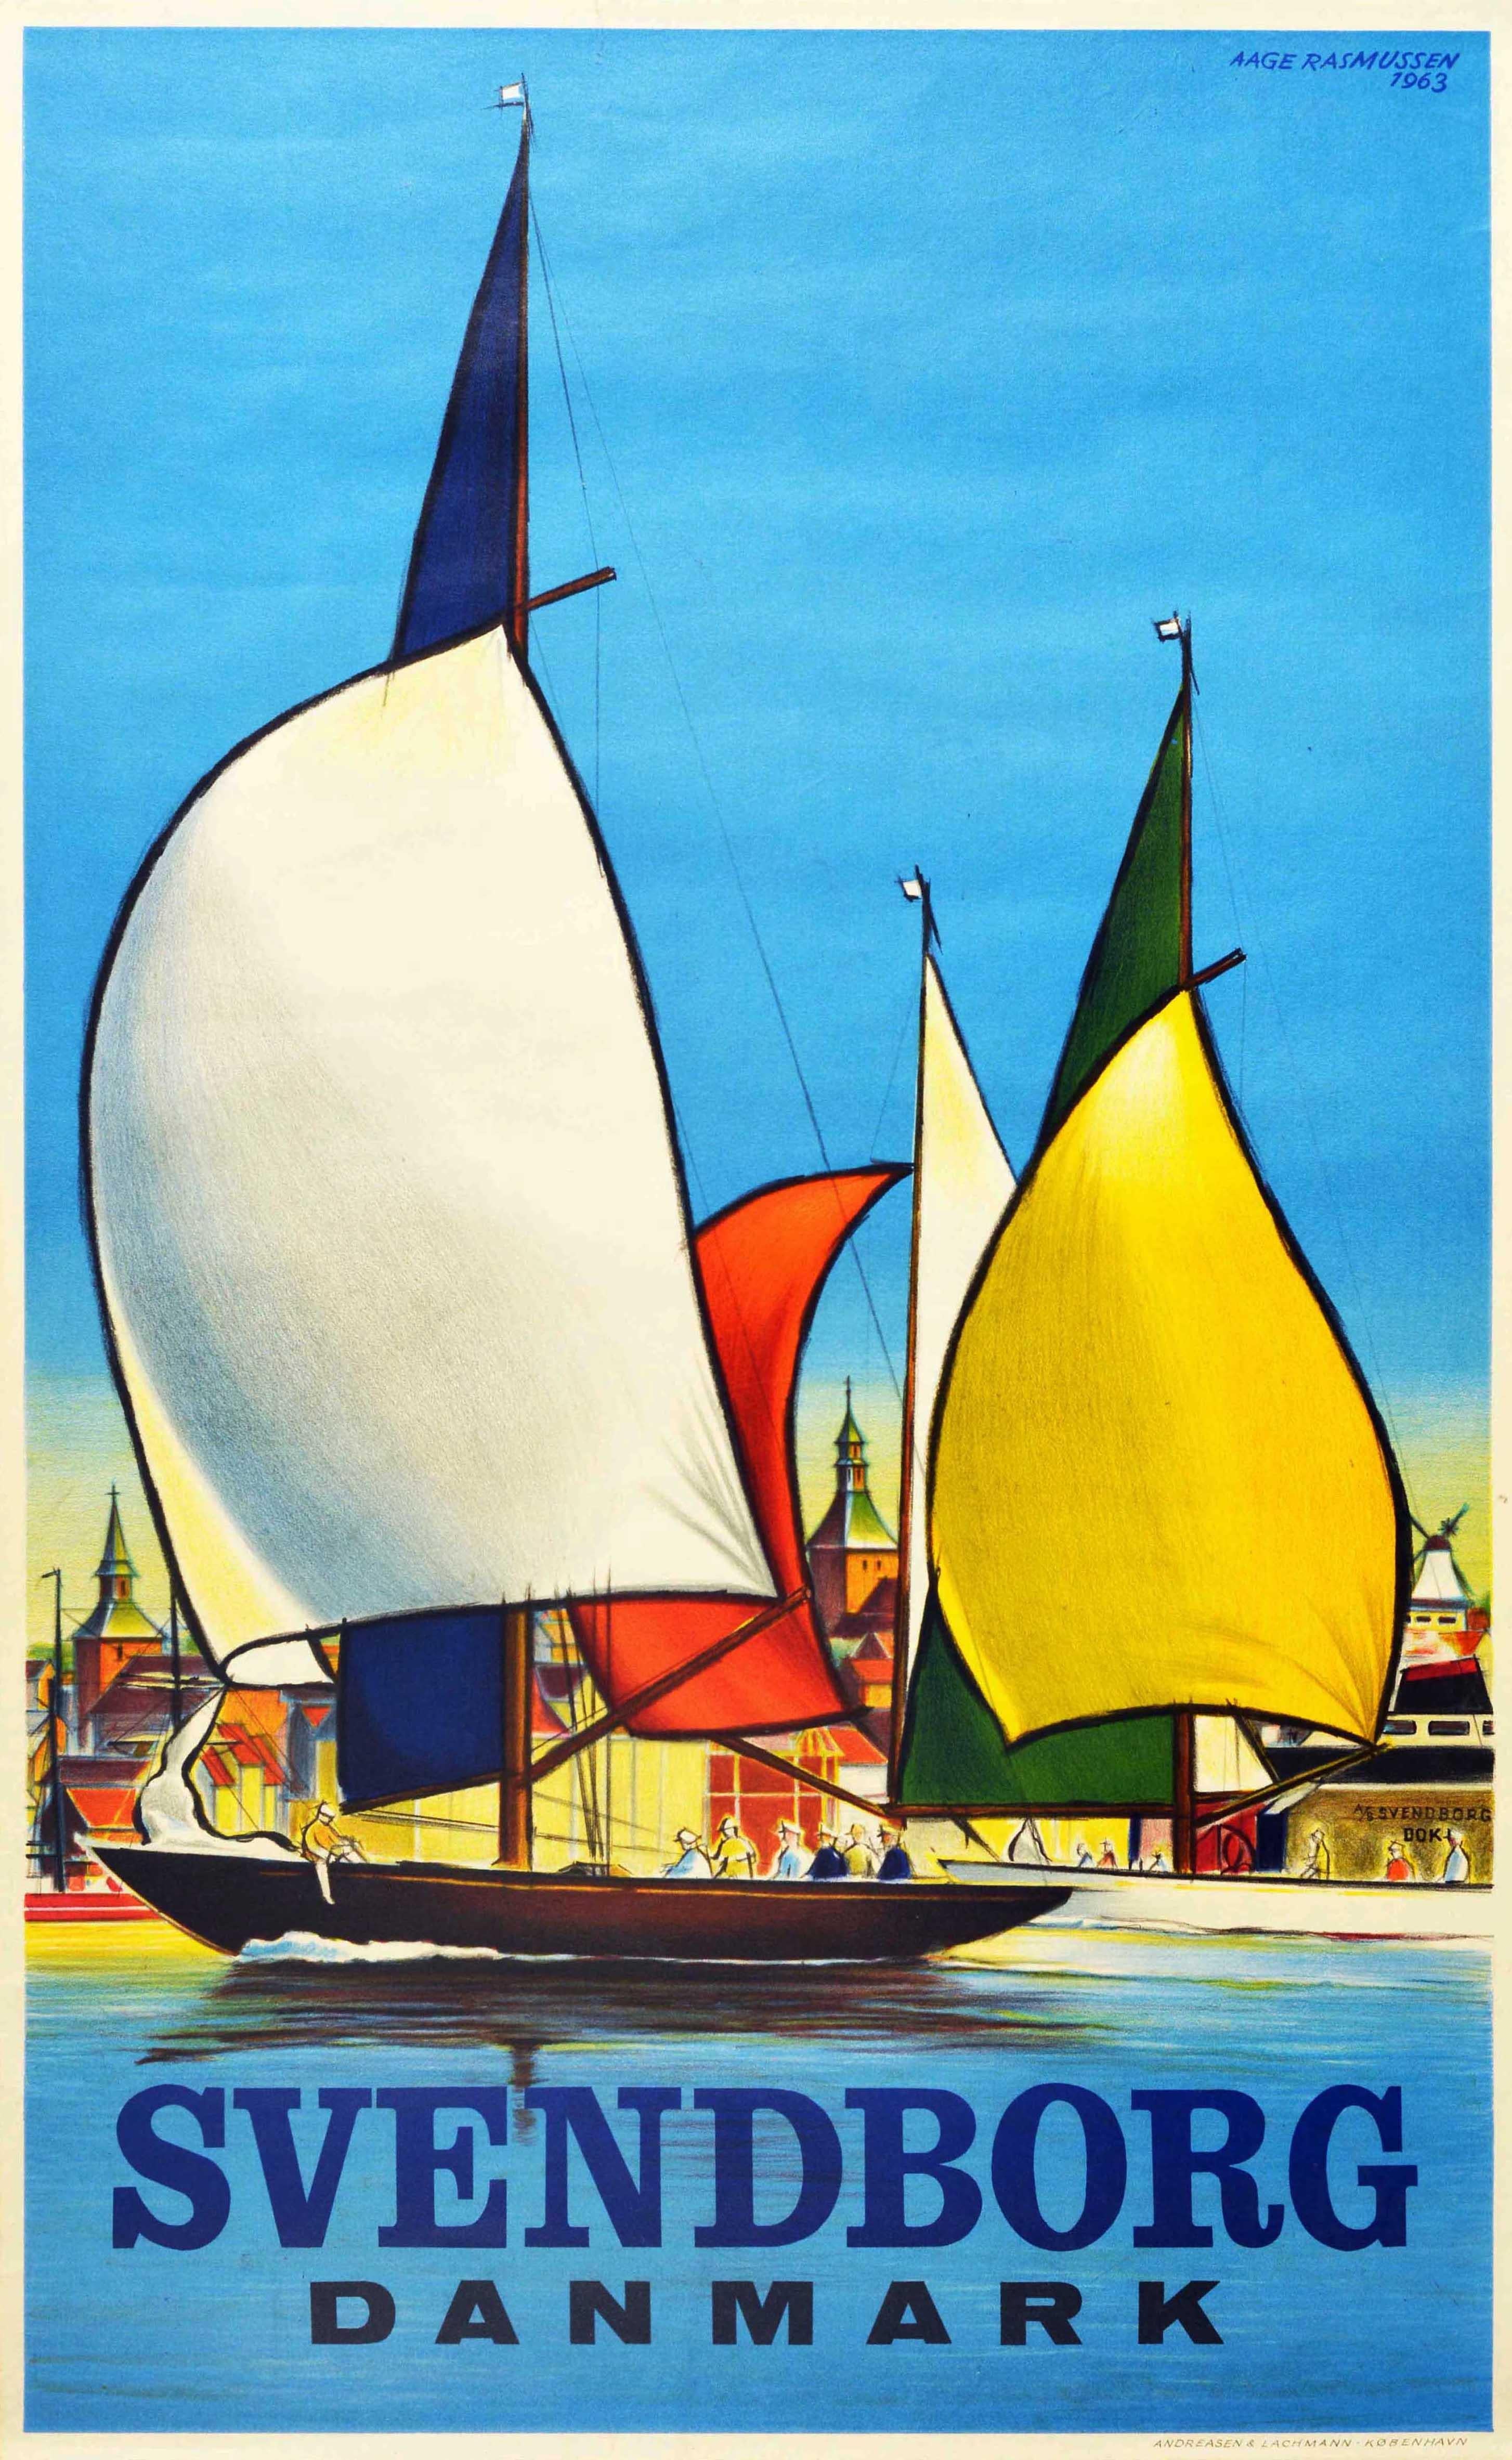 Original vintage travel poster for Svendborg Danmark / Denmark featuring an illustration by the Danish artist Aage Rasmussen (1913-1975) of sailing boats on the coast with colourful full sails and people enjoying their trip on the calm water with